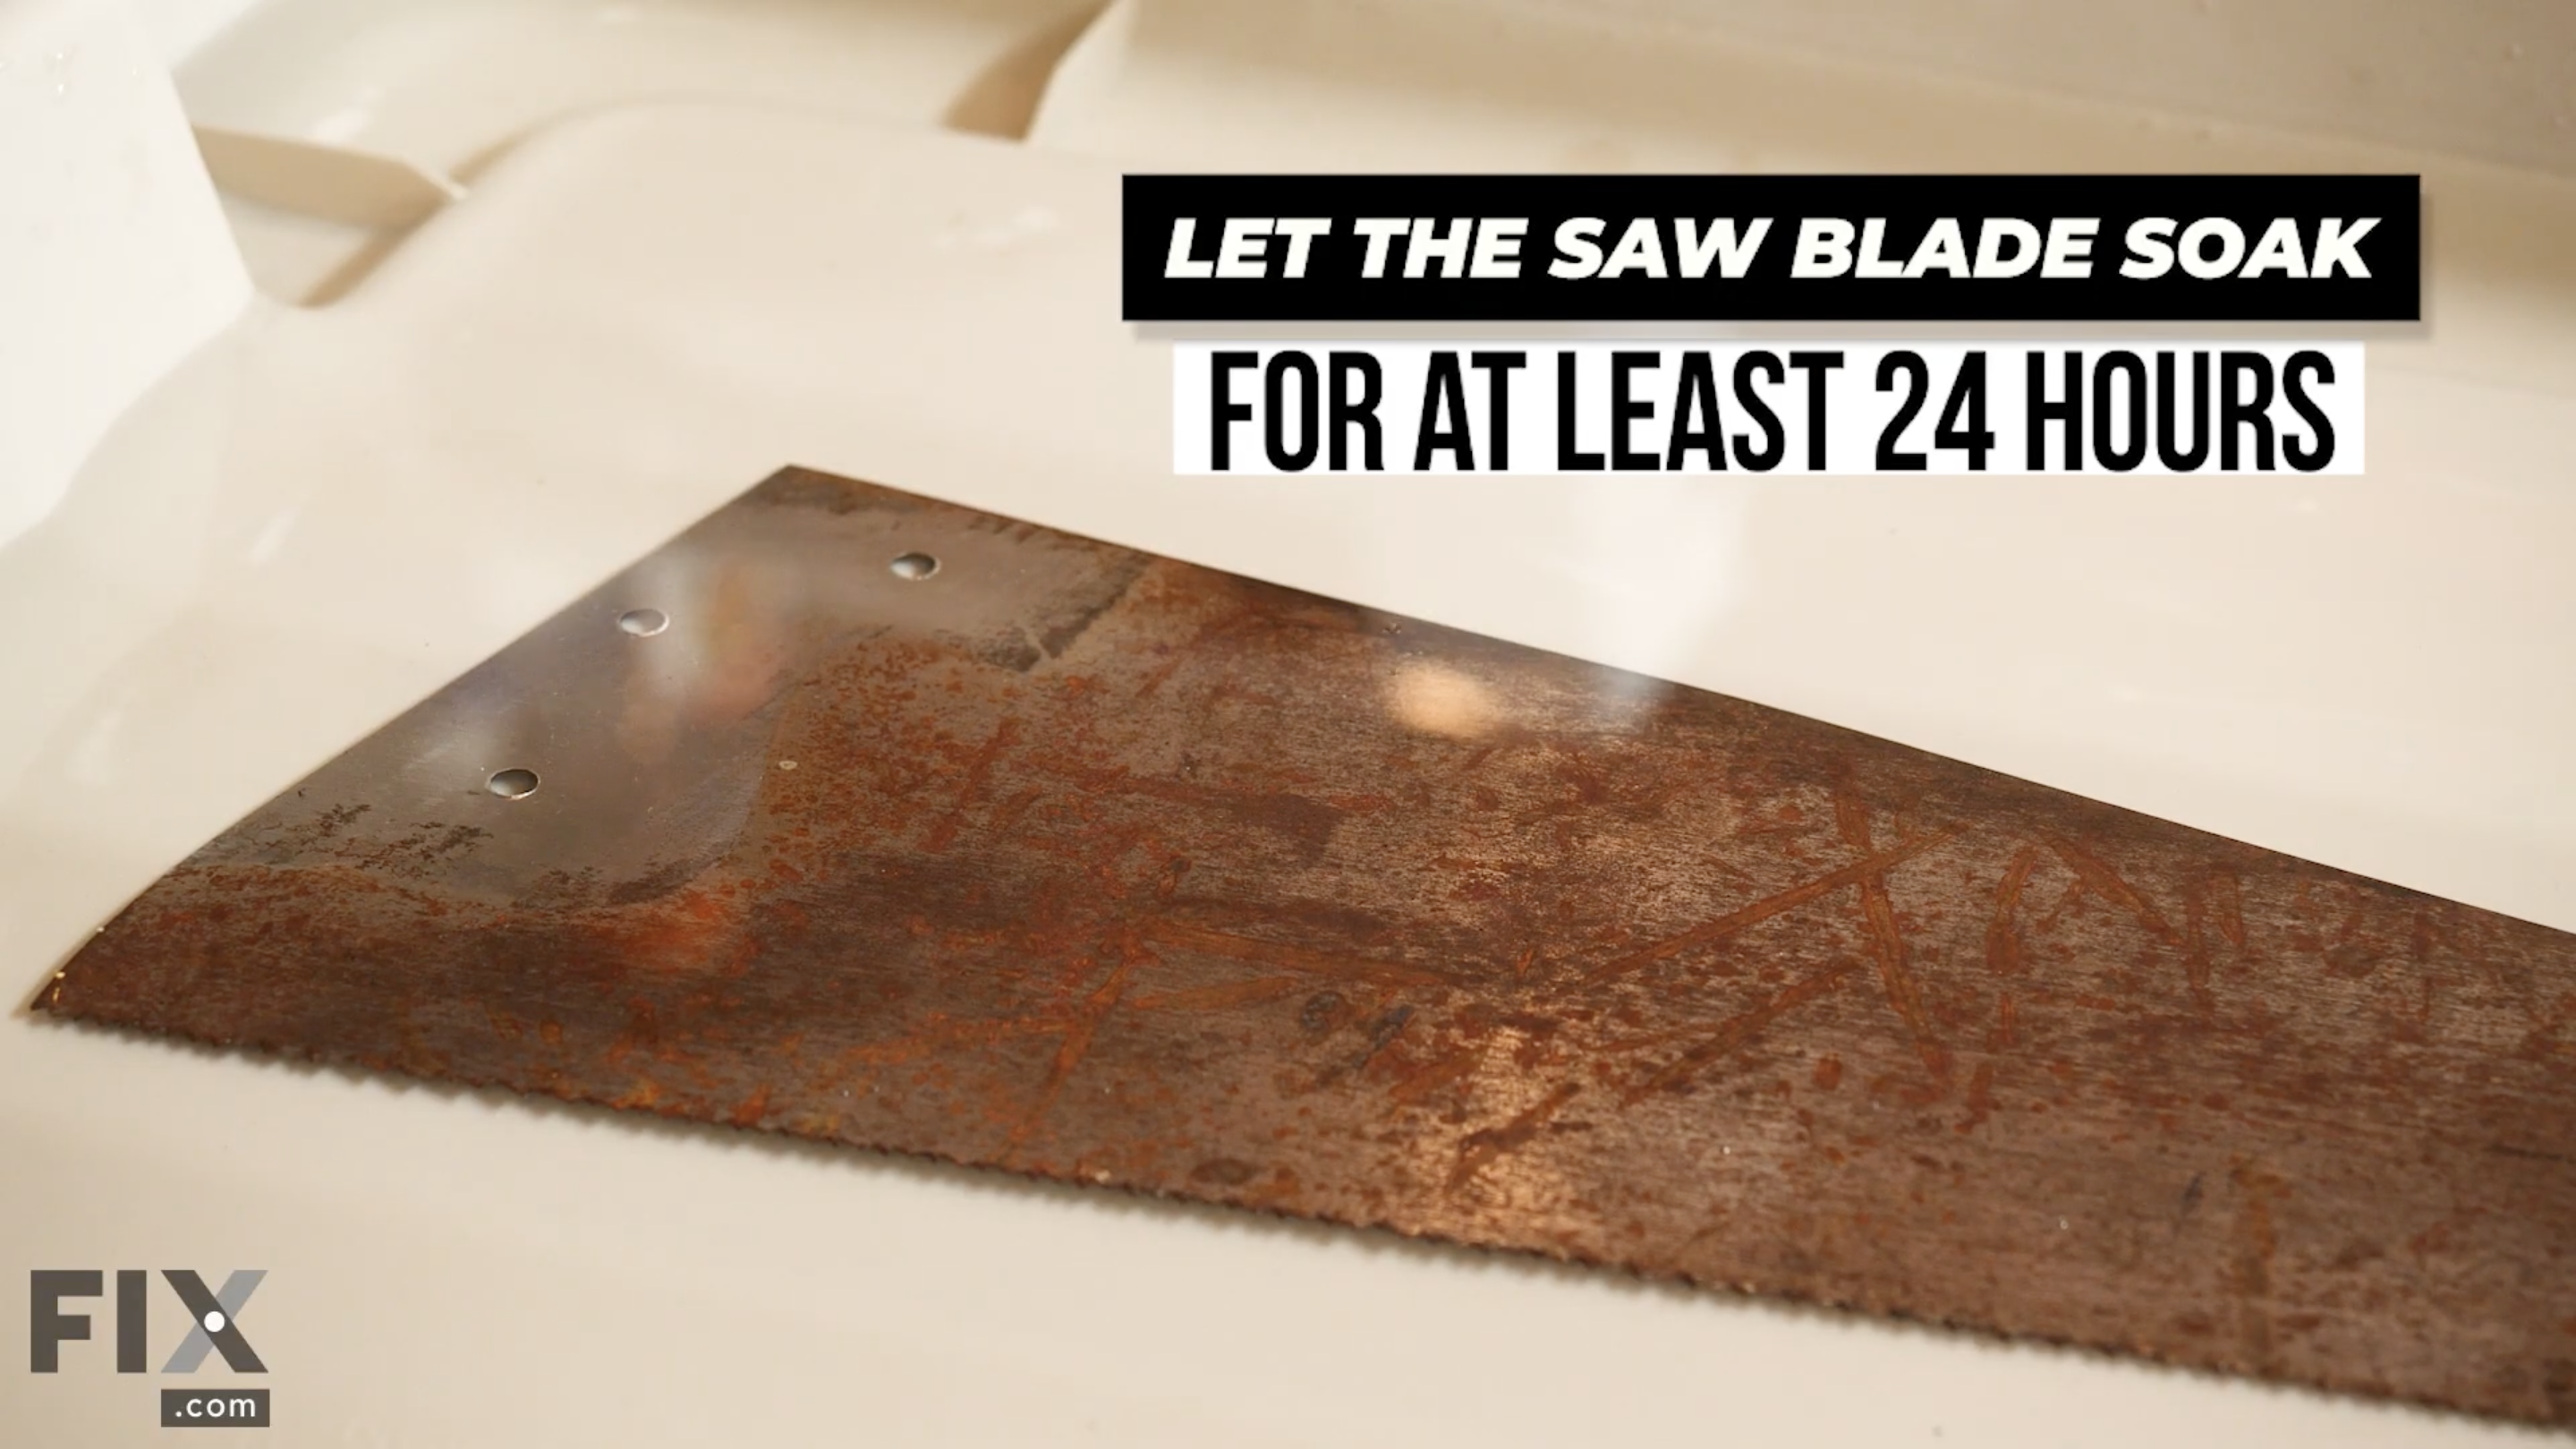 The saw blade will need to be soaked in the vinegar-water mixture 24 hours to completely break down the rust, dirt and grime.